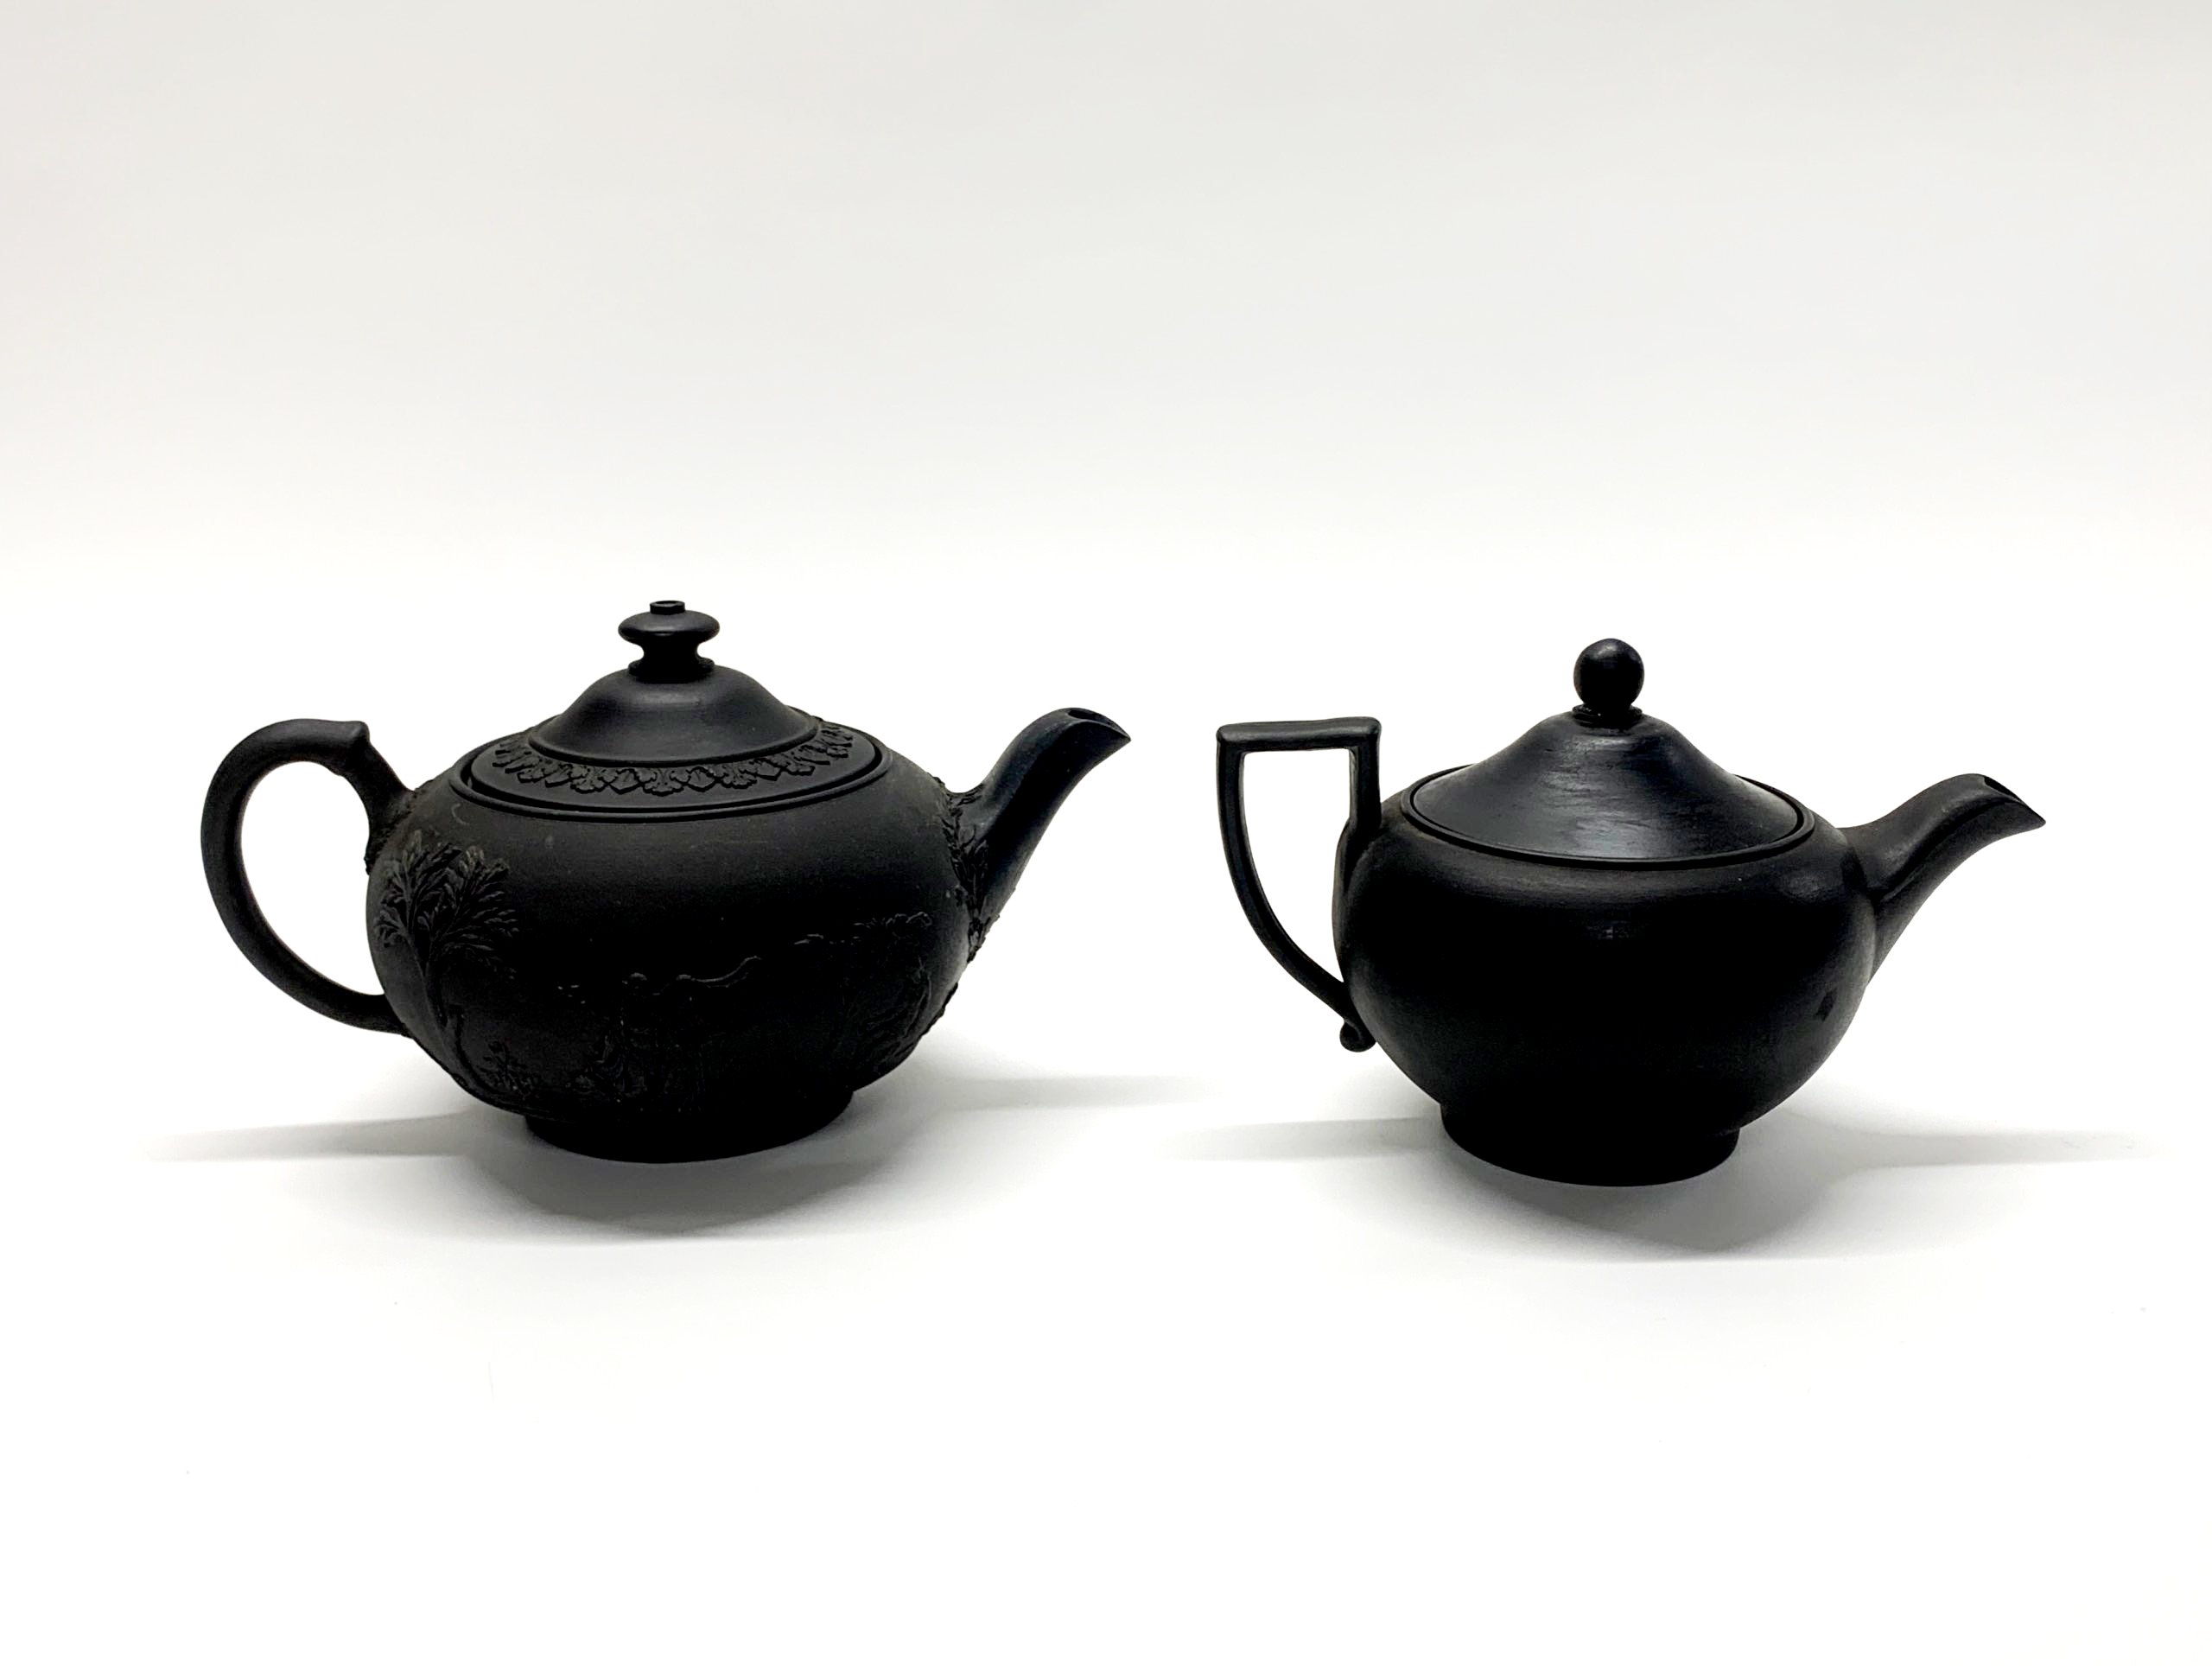 Two Wedgwood Black Basalt teapots, c. 1900, together with two Black Basalt dishes. - Image 2 of 5